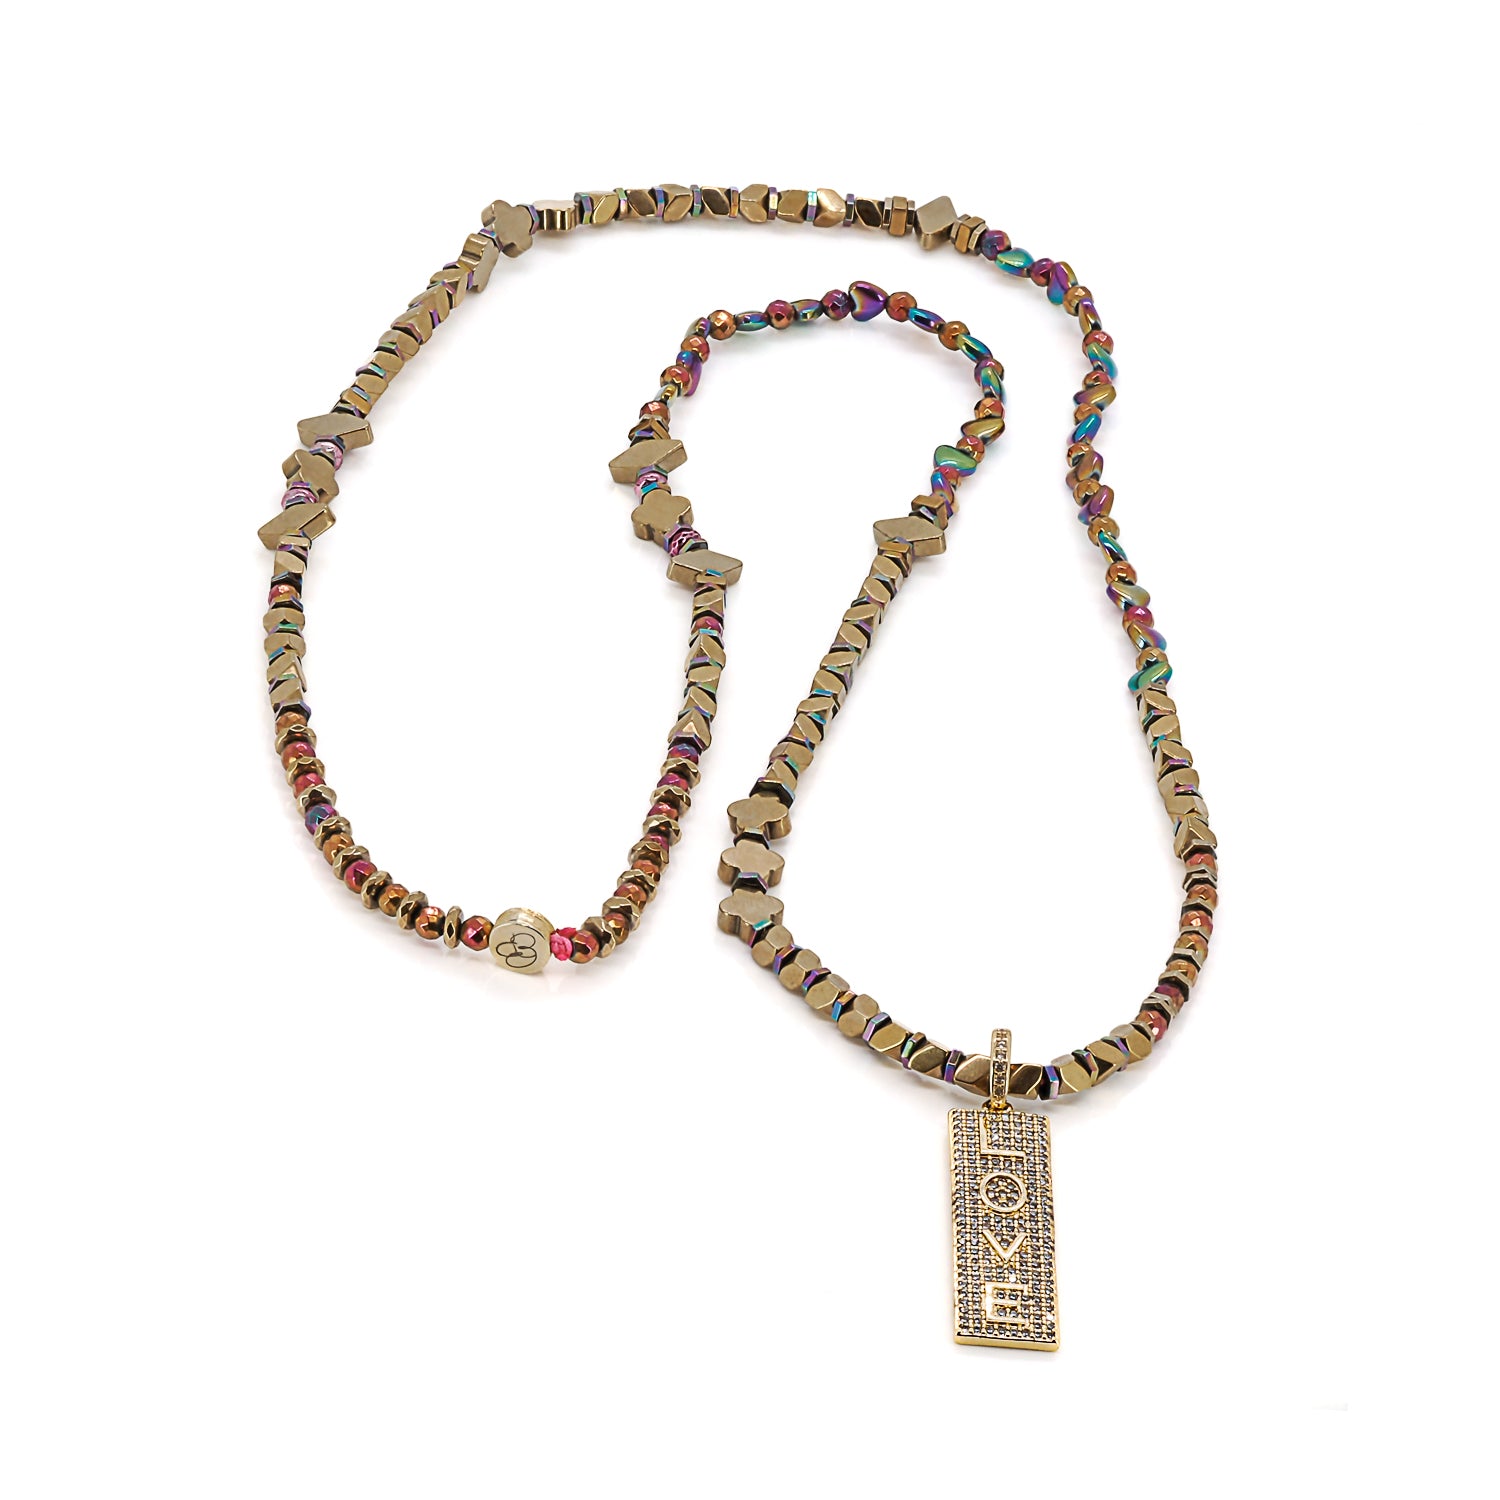 The necklace features gold color hematite stone beads, known for enhancing emotional balance and promoting positive energy flow, making it the ideal choice for a love-themed necklace